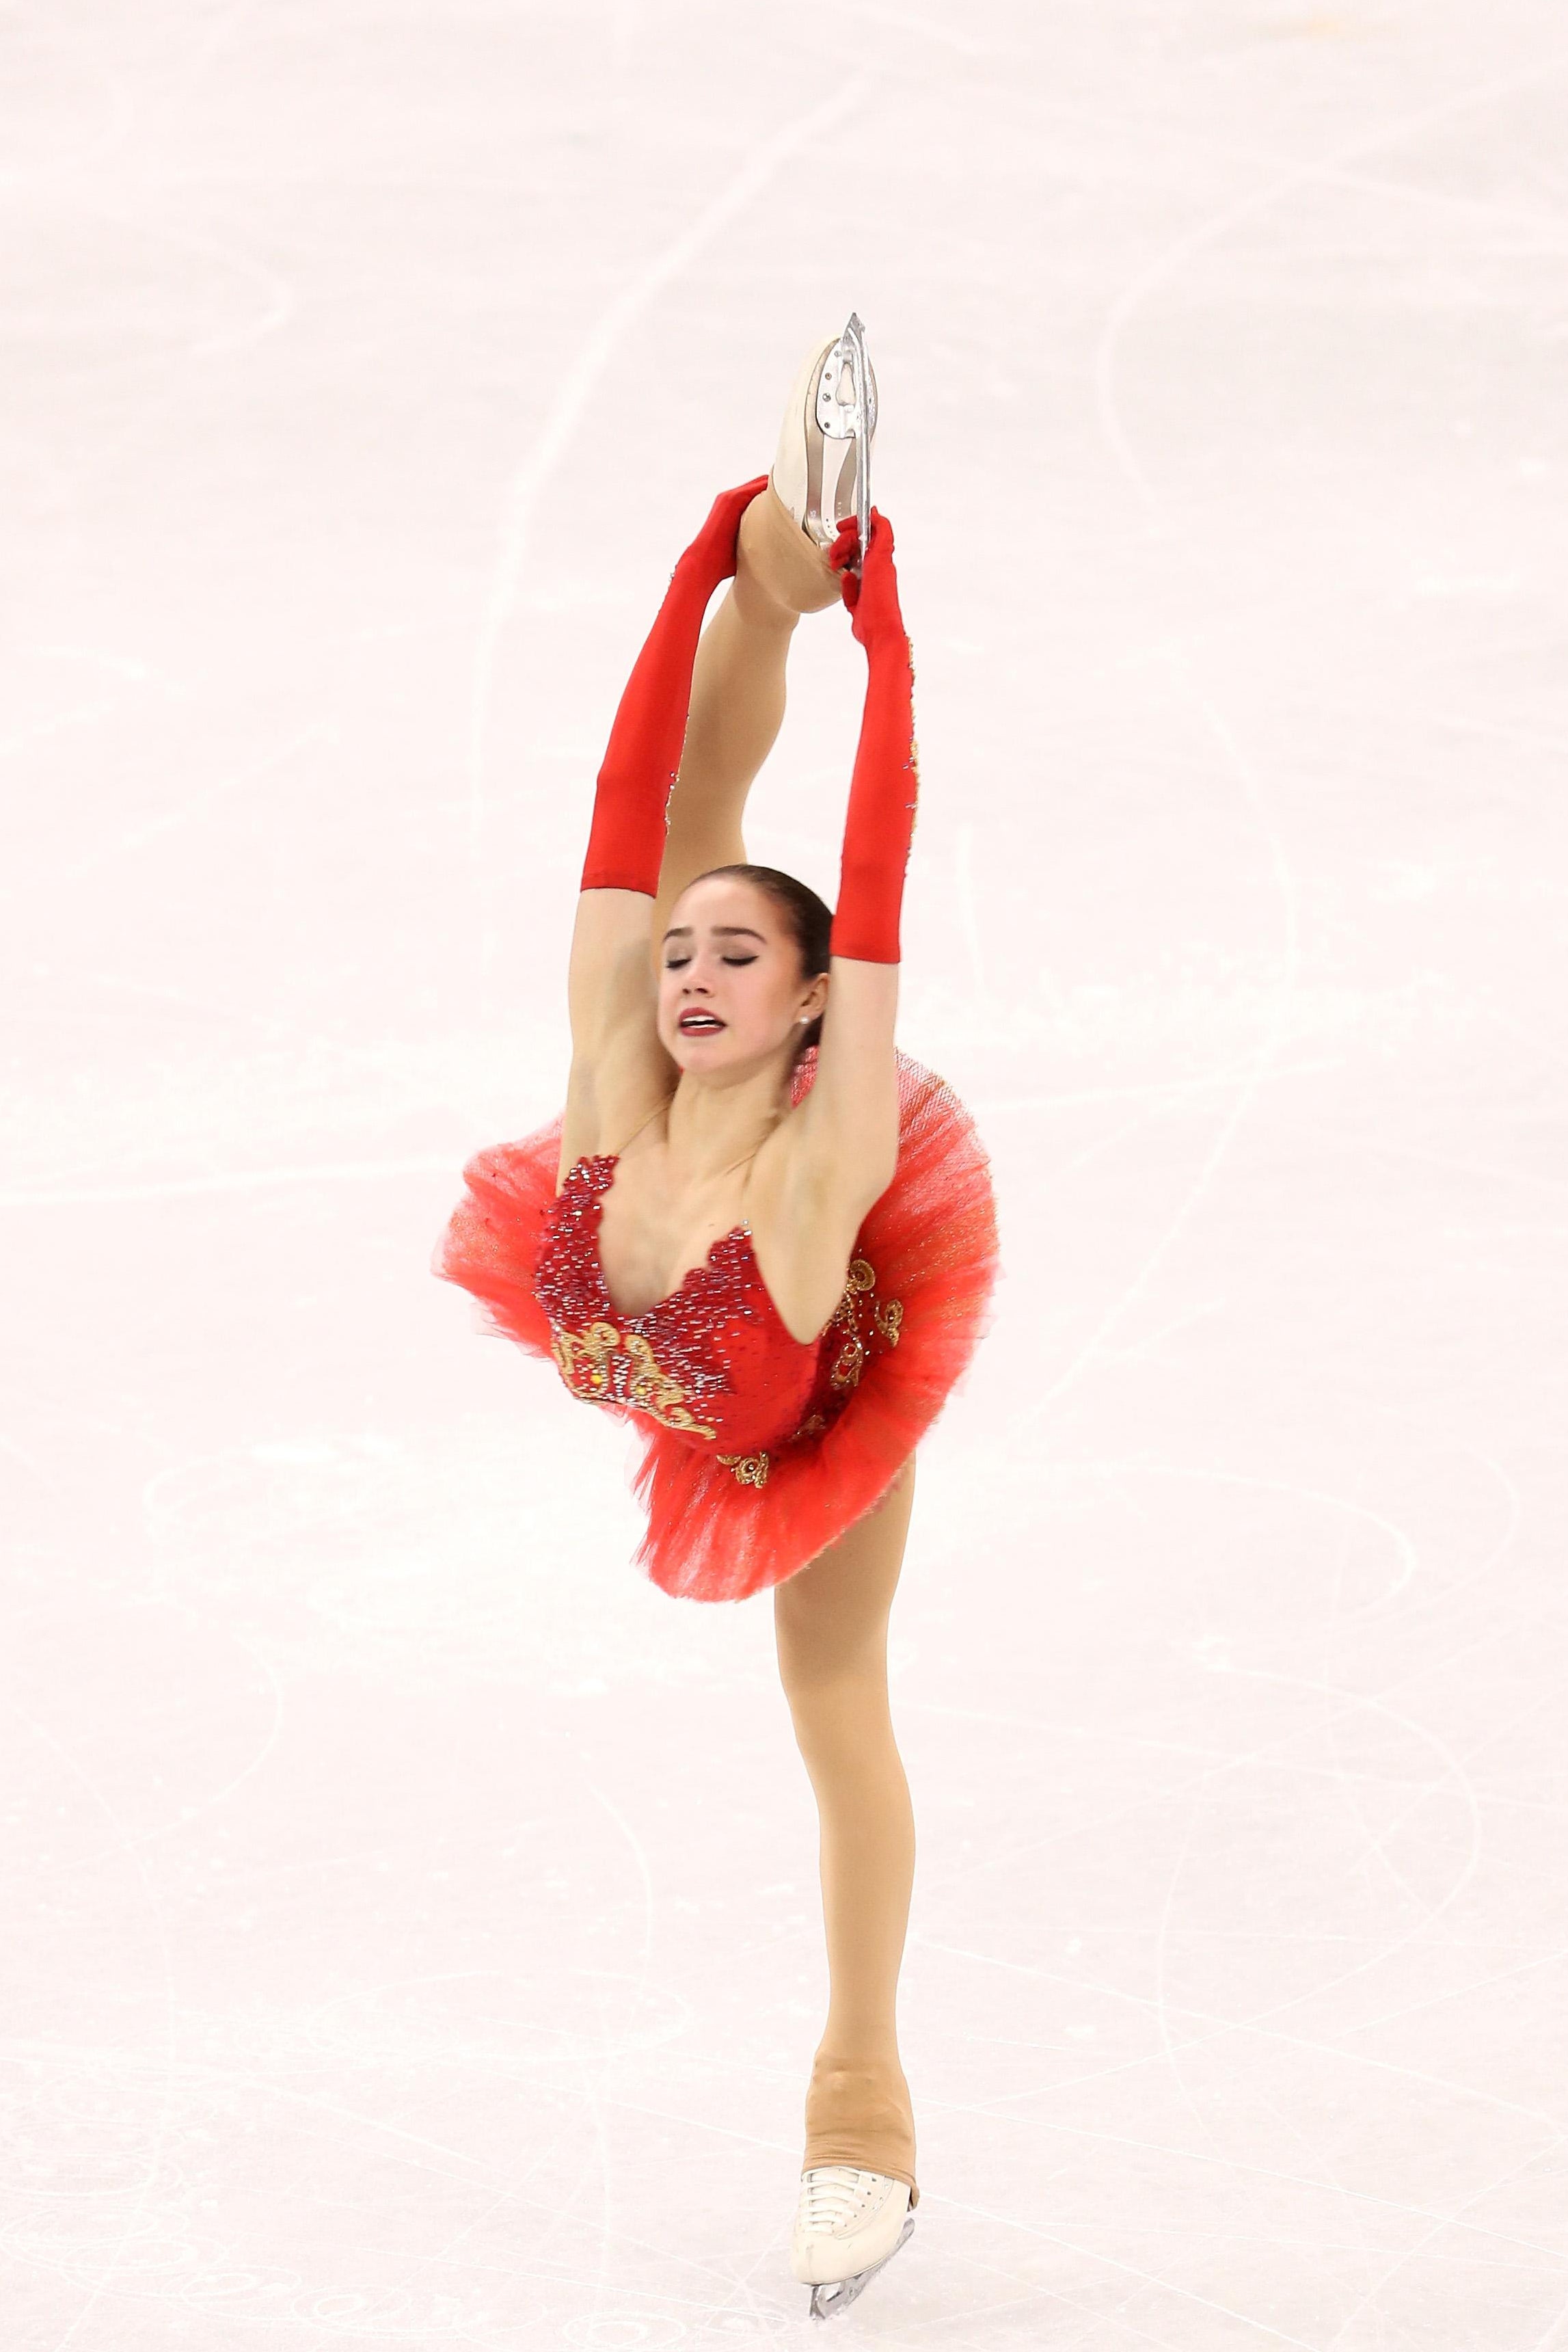 GANGNEUNG, SOUTH KOREA - FEBRUARY 23:  Alina Zagitova of Olympic Athlete from Russia competes during the Ladies Single Skating Free Skating on day fourteen of the PyeongChang 2018 Winter Olympic Games at Gangneung Ice Arena on February 23, 2018 in Gangneung, South Korea.  (Photo by Jamie Squire/Getty Images)